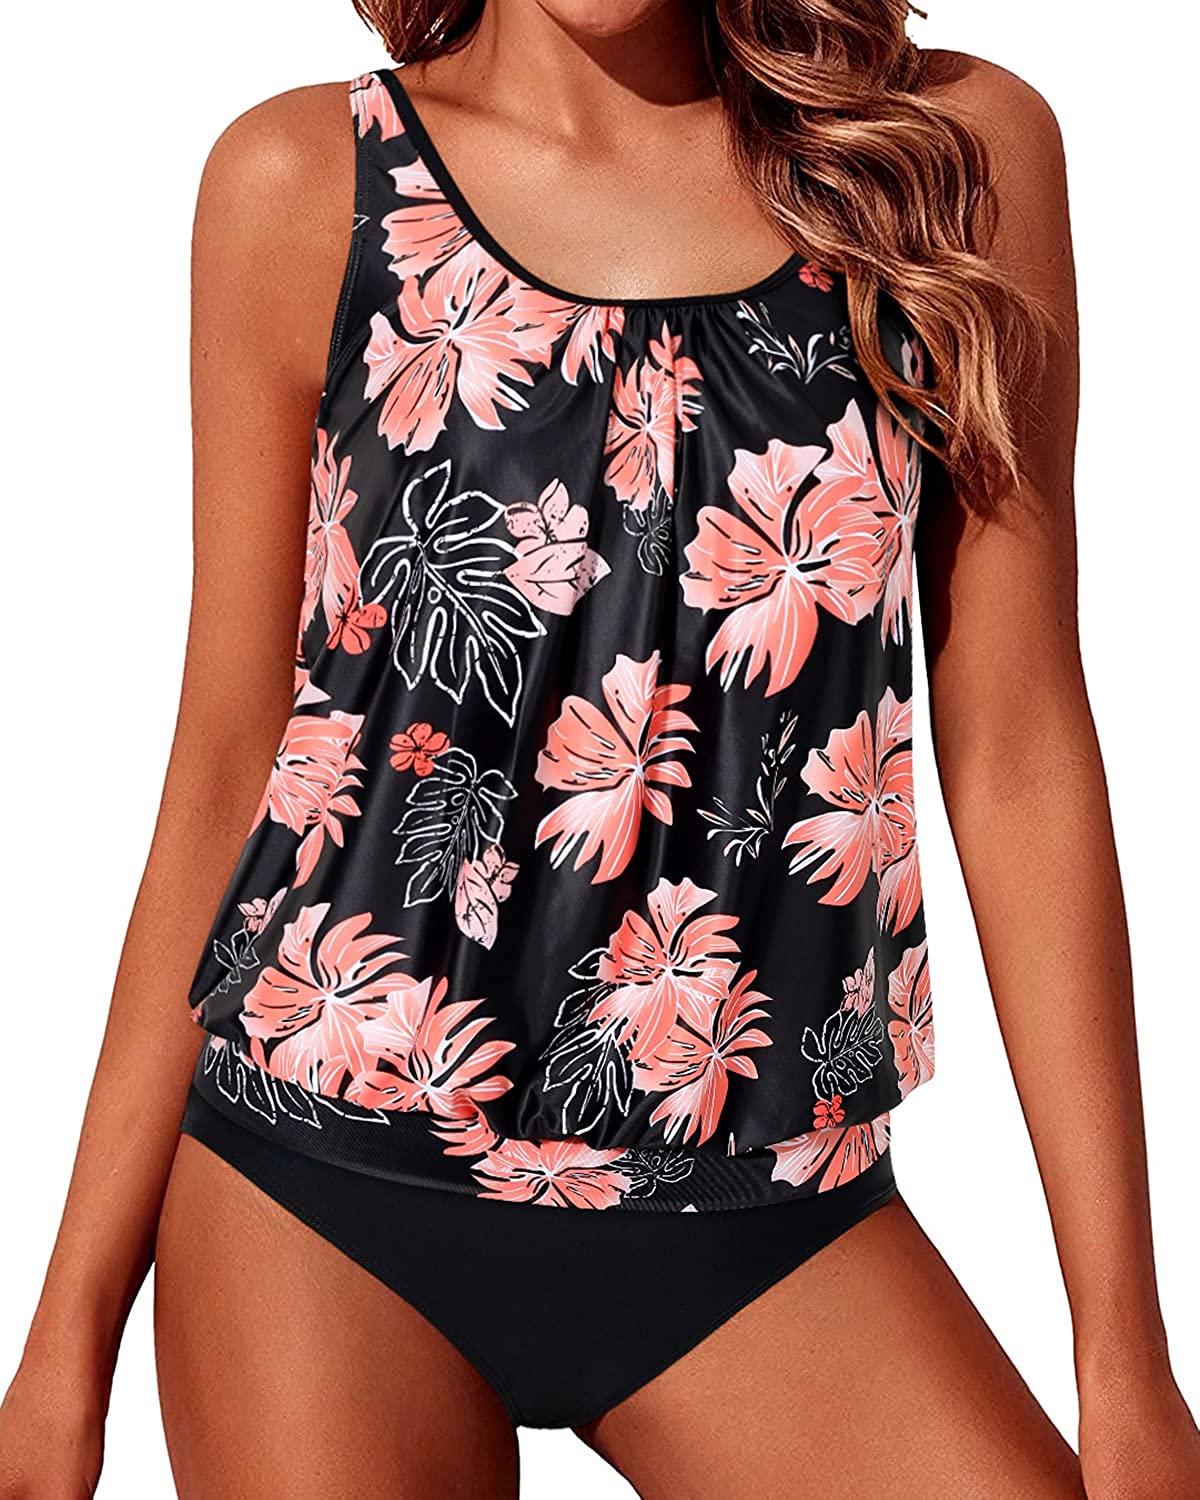 Holipick Blouson Tankini Swimsuits for Women Modest Tummy Control Two Piece Bathing Suits Loose Tankini with Shorts 